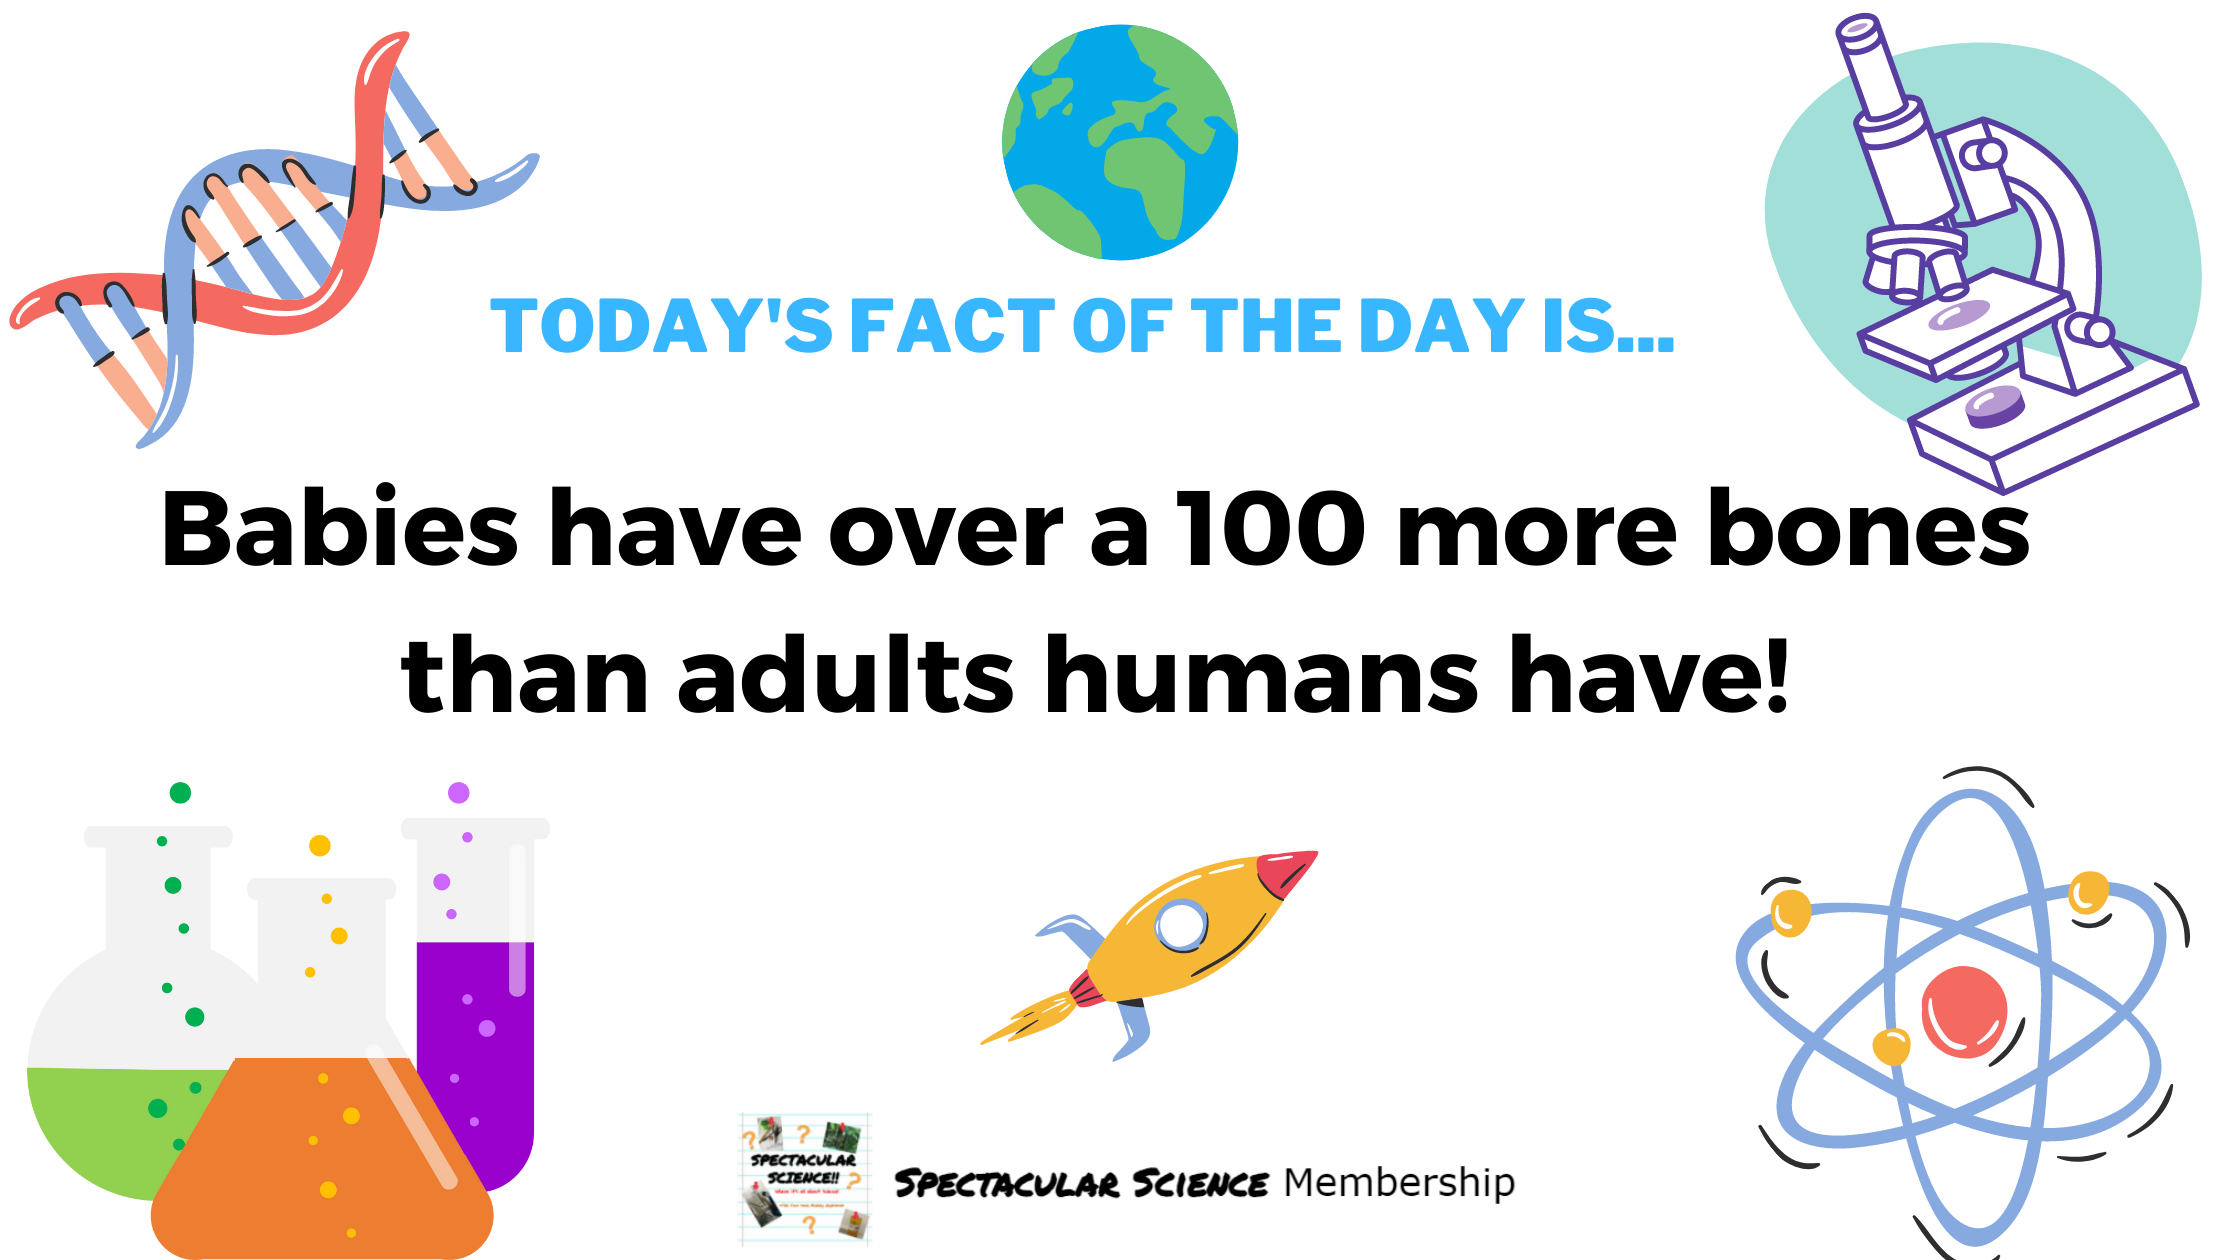 Fact of the Day Image Nov. 10th